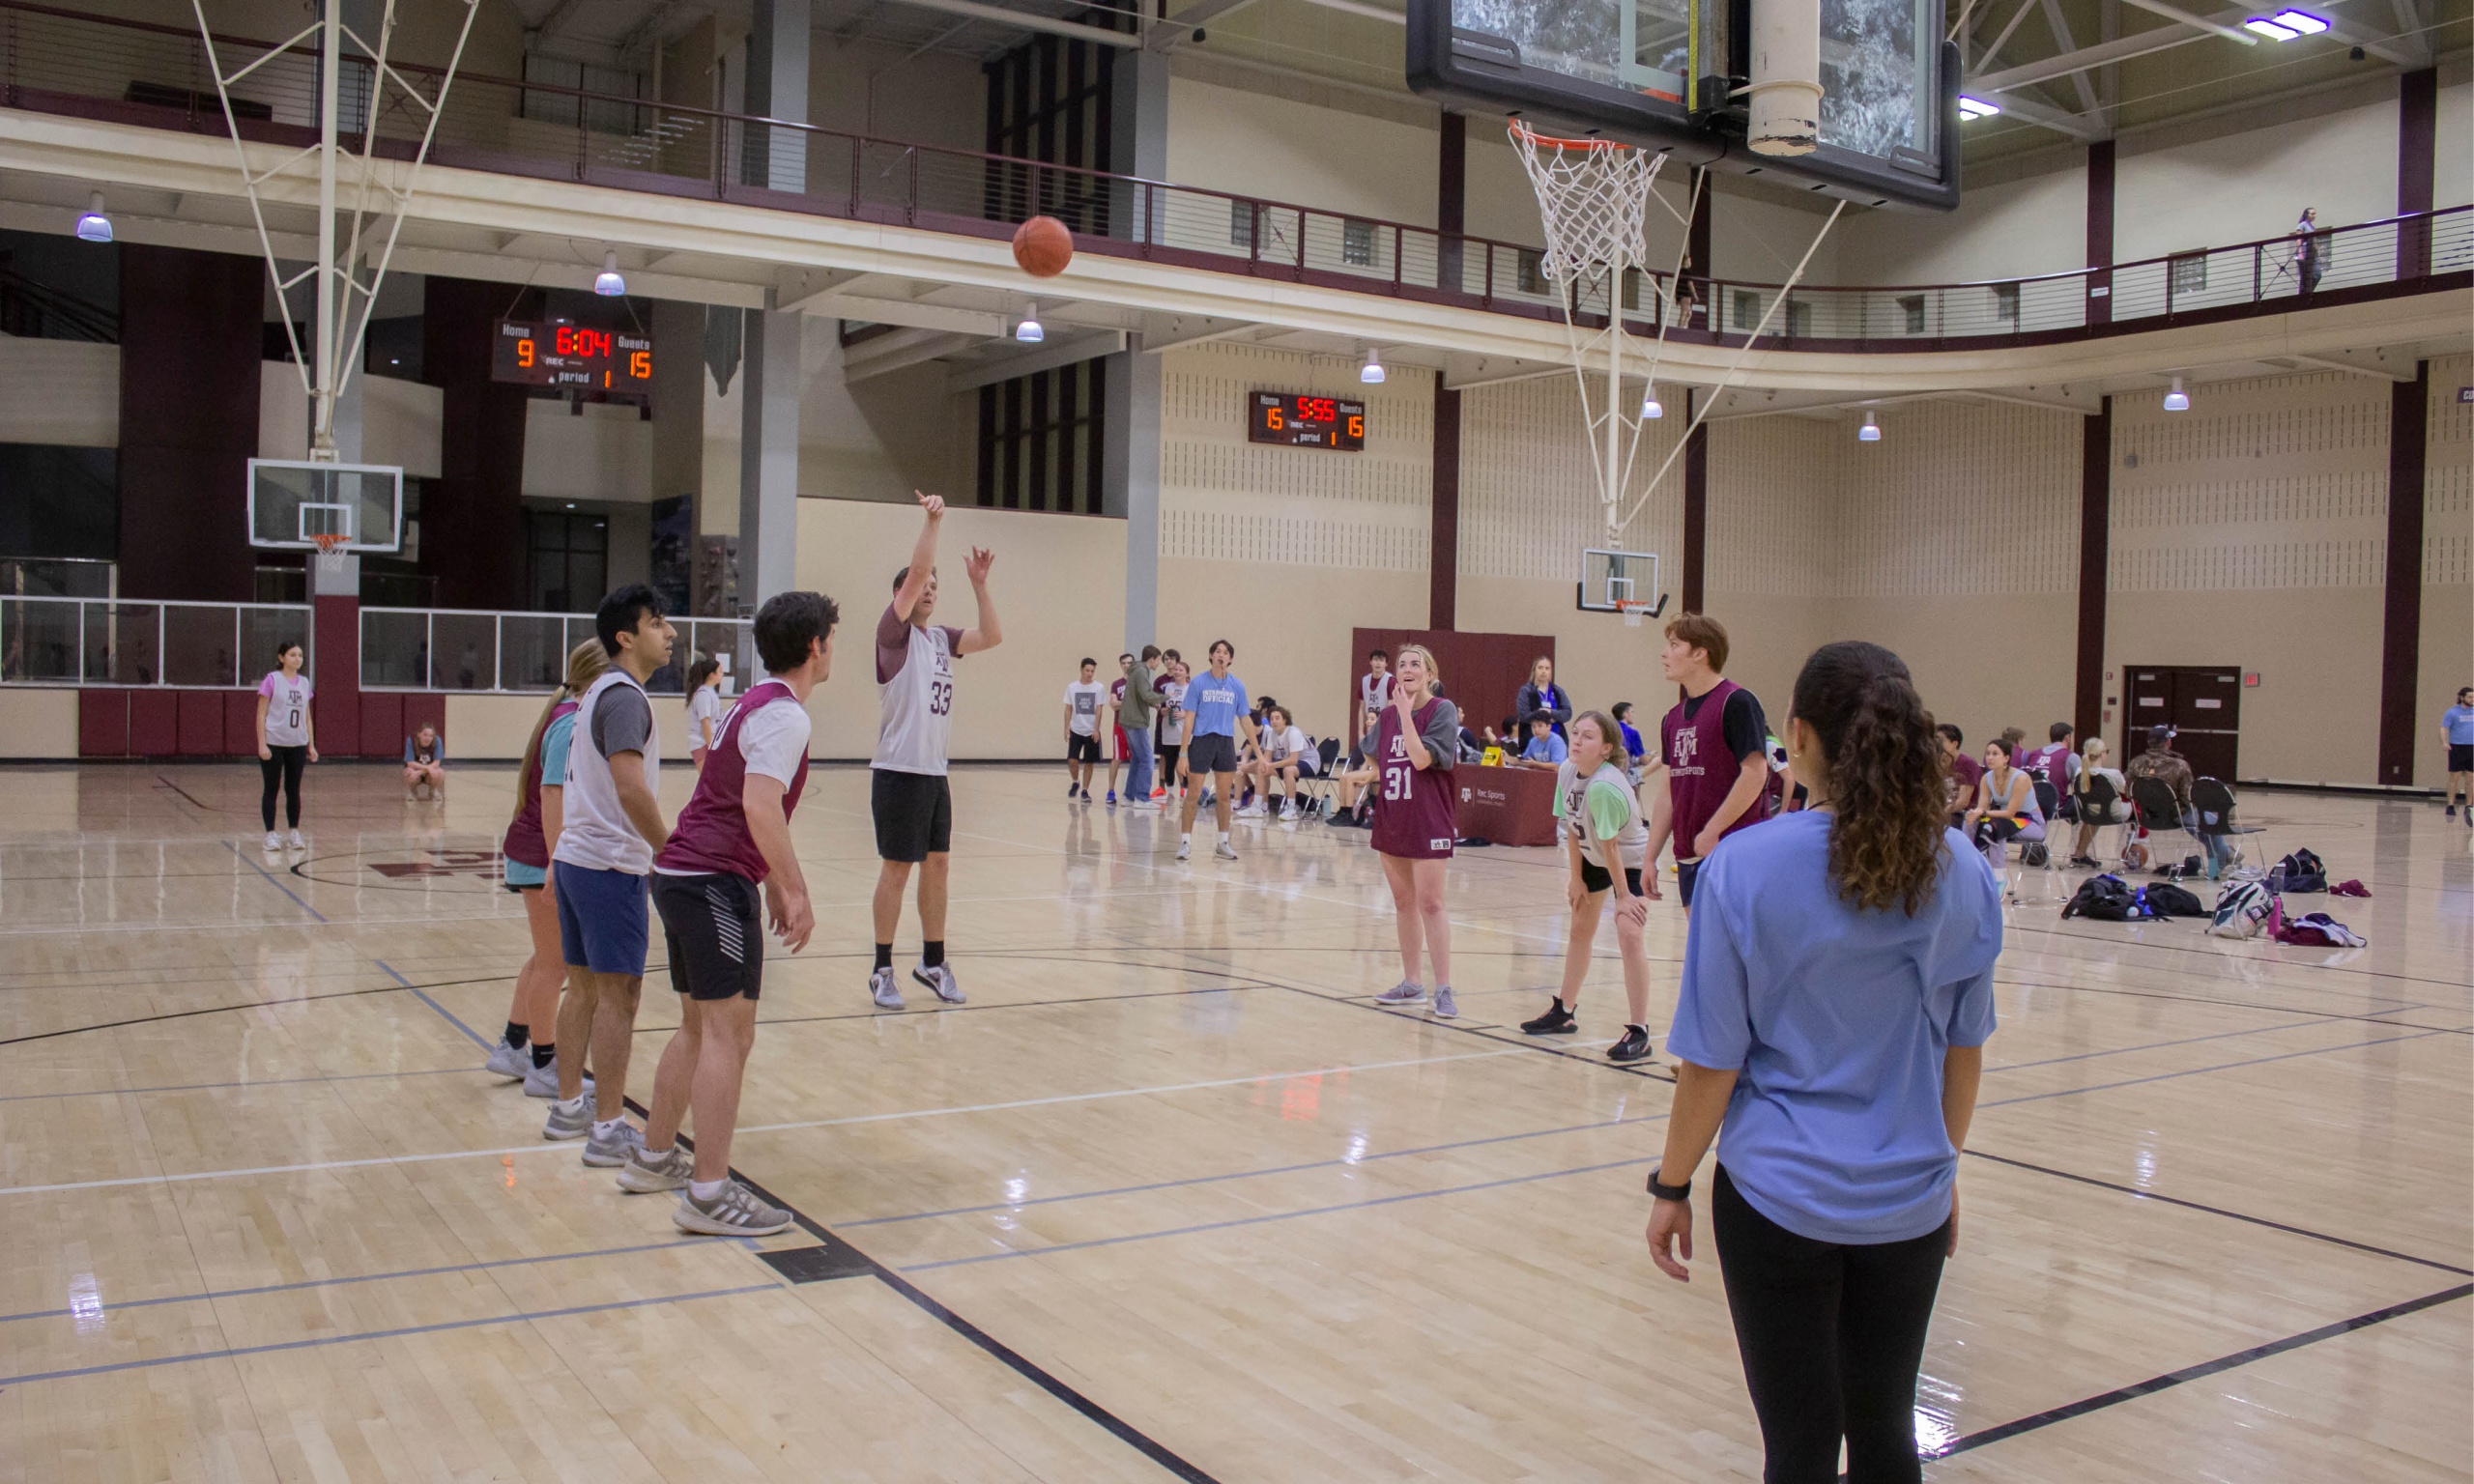 A dynamic atmosphere fills the gymnasium as a group of individuals actively engage in a game of basketball, demonstrating their agility, coordination, and love for the sport.